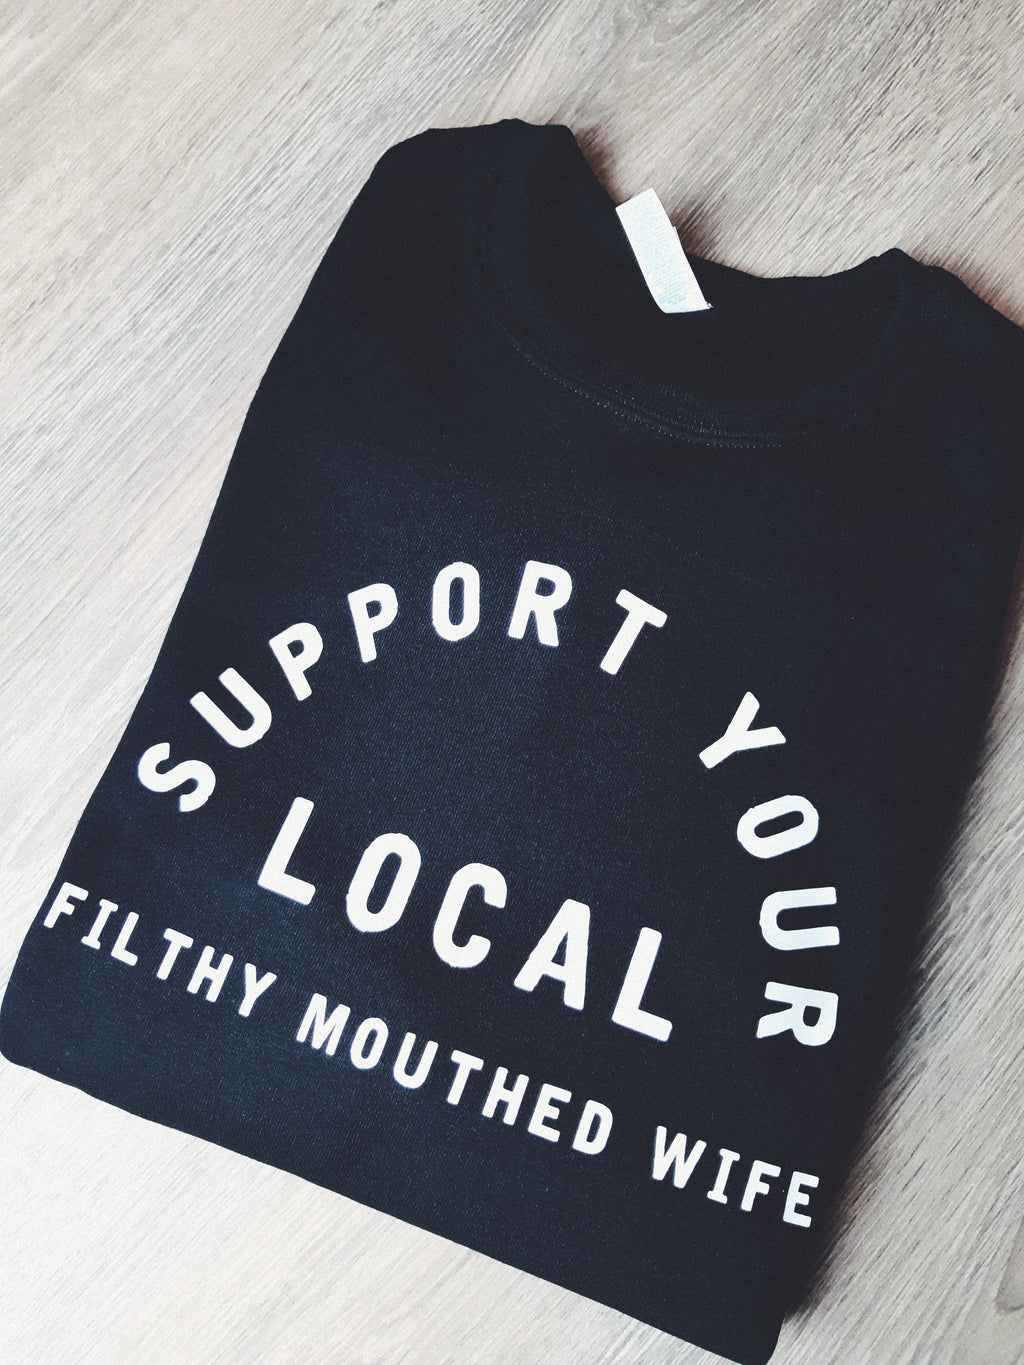 Support Your Local Filthy Mouthed Wife Crew Sweatshirt